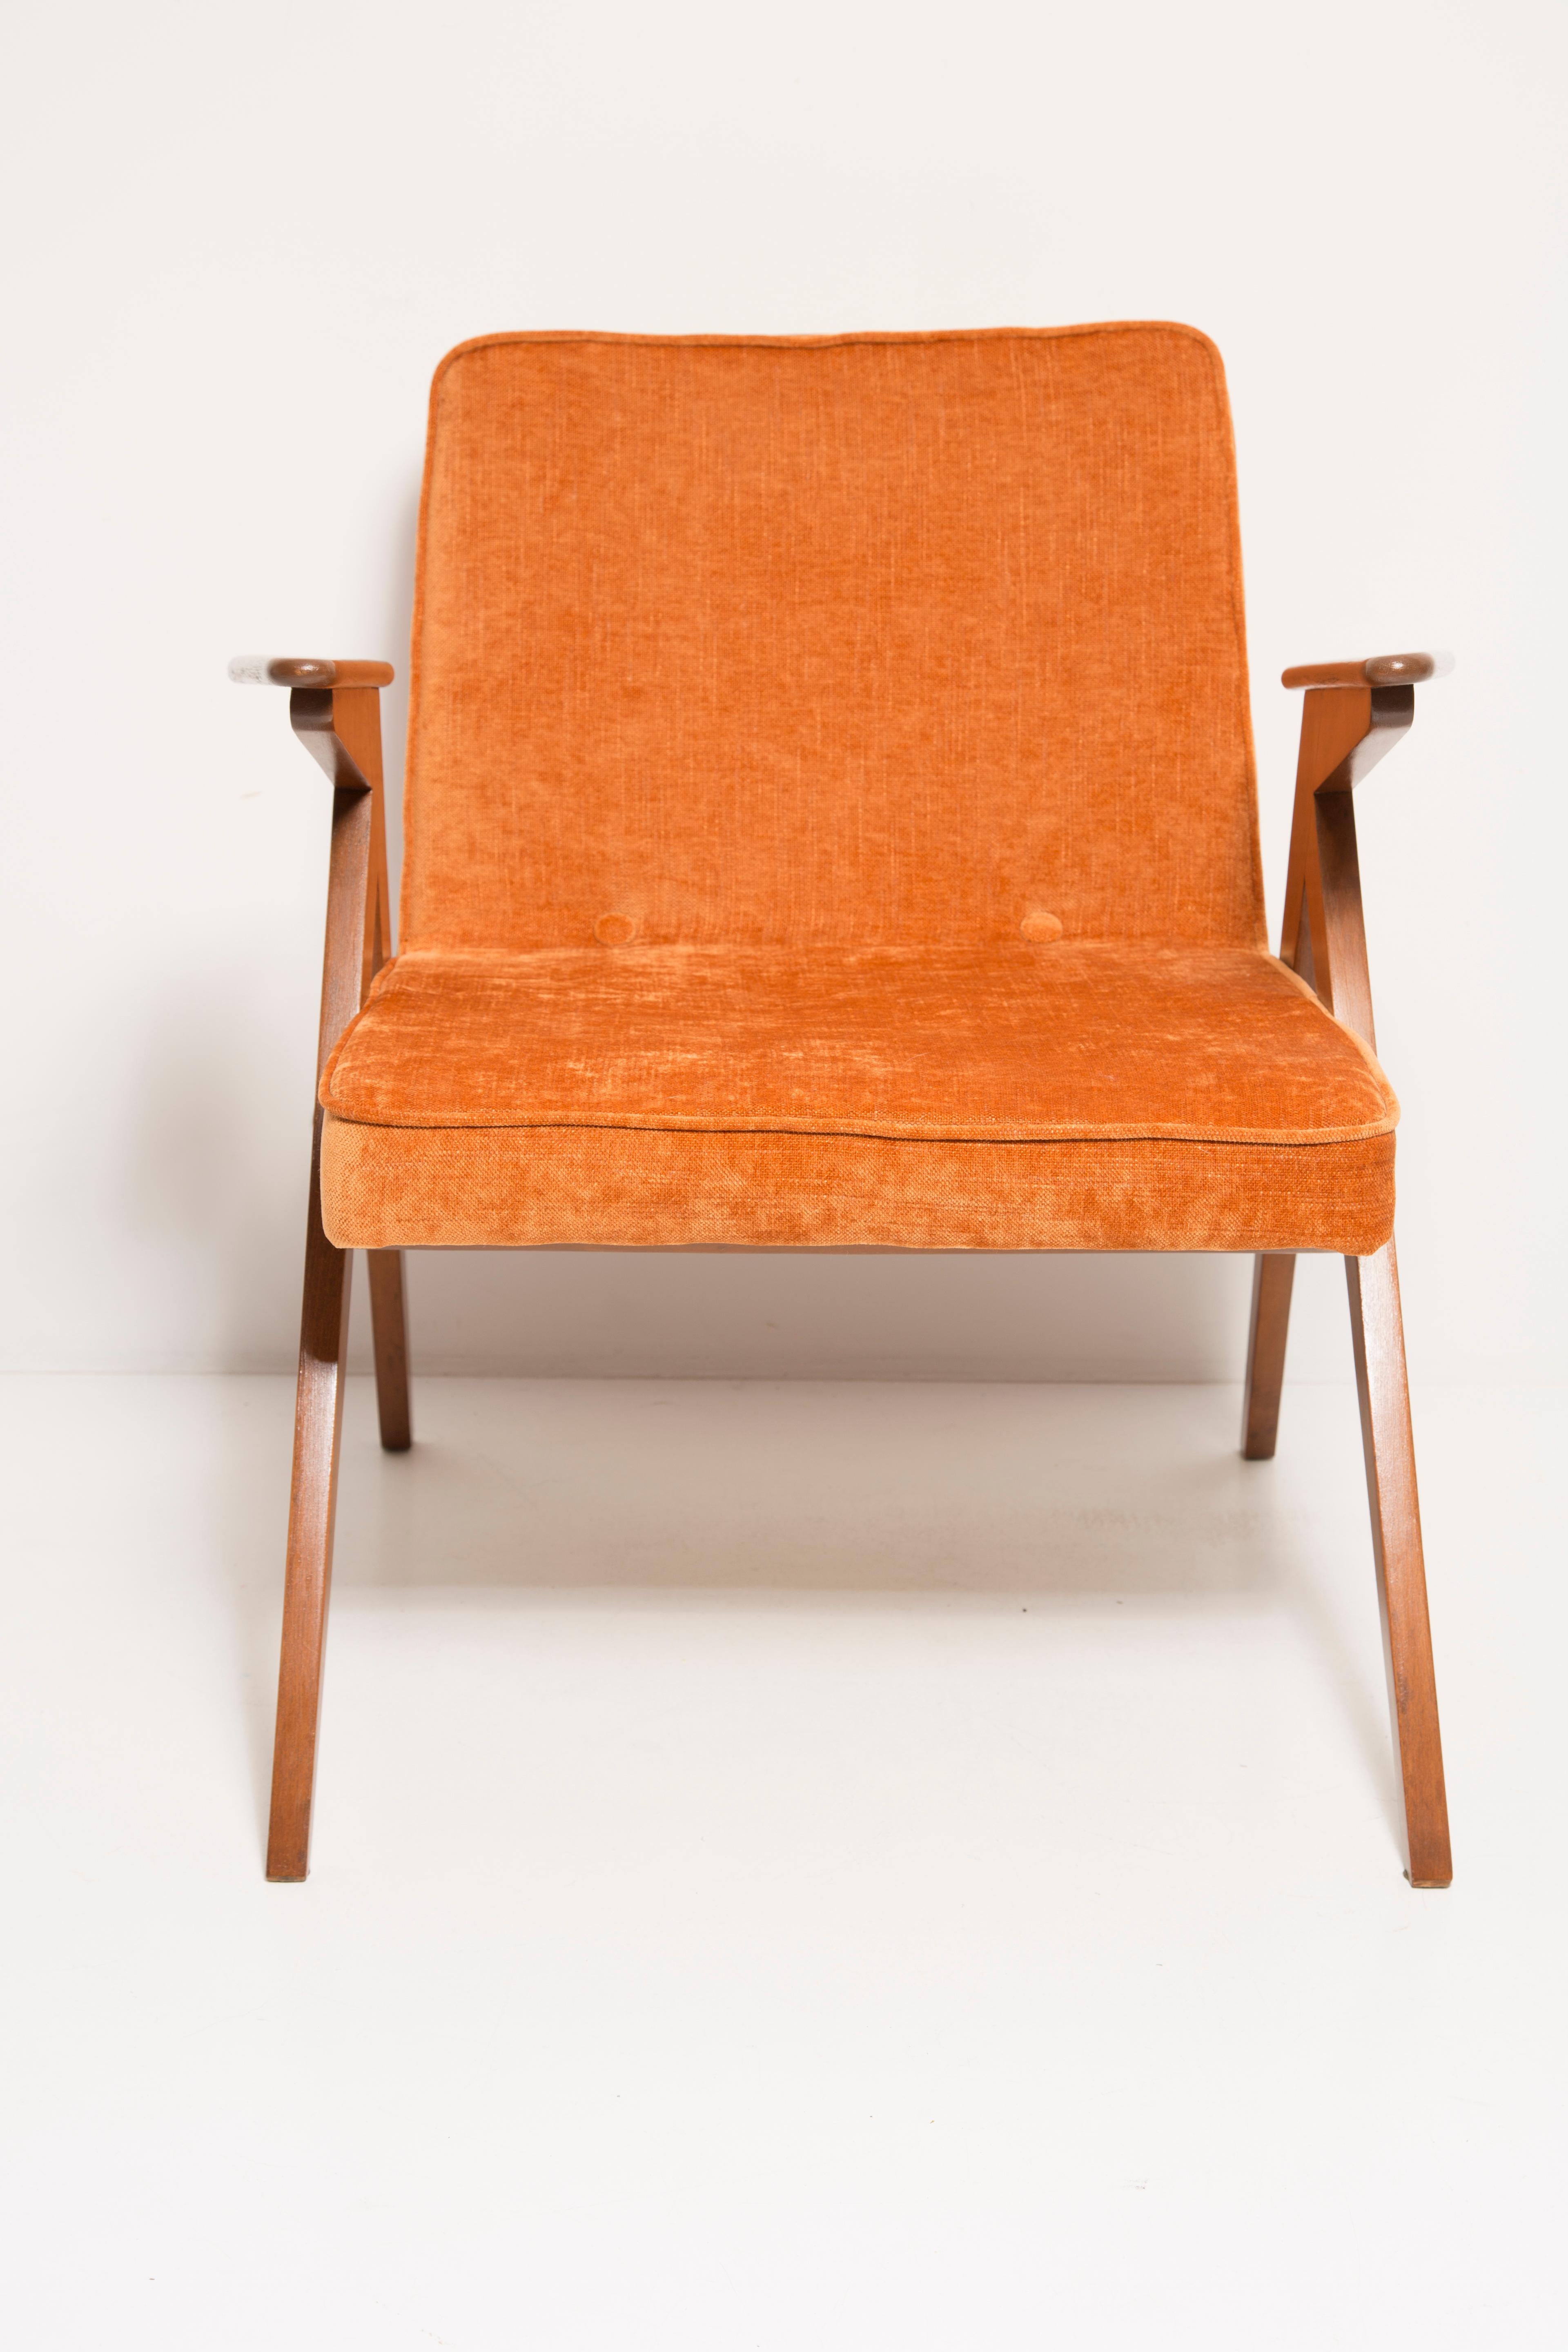 Set of Two Midcentury Orange Bunny Armchairs by Jozef Chierowski, Poland, 1960s For Sale 3